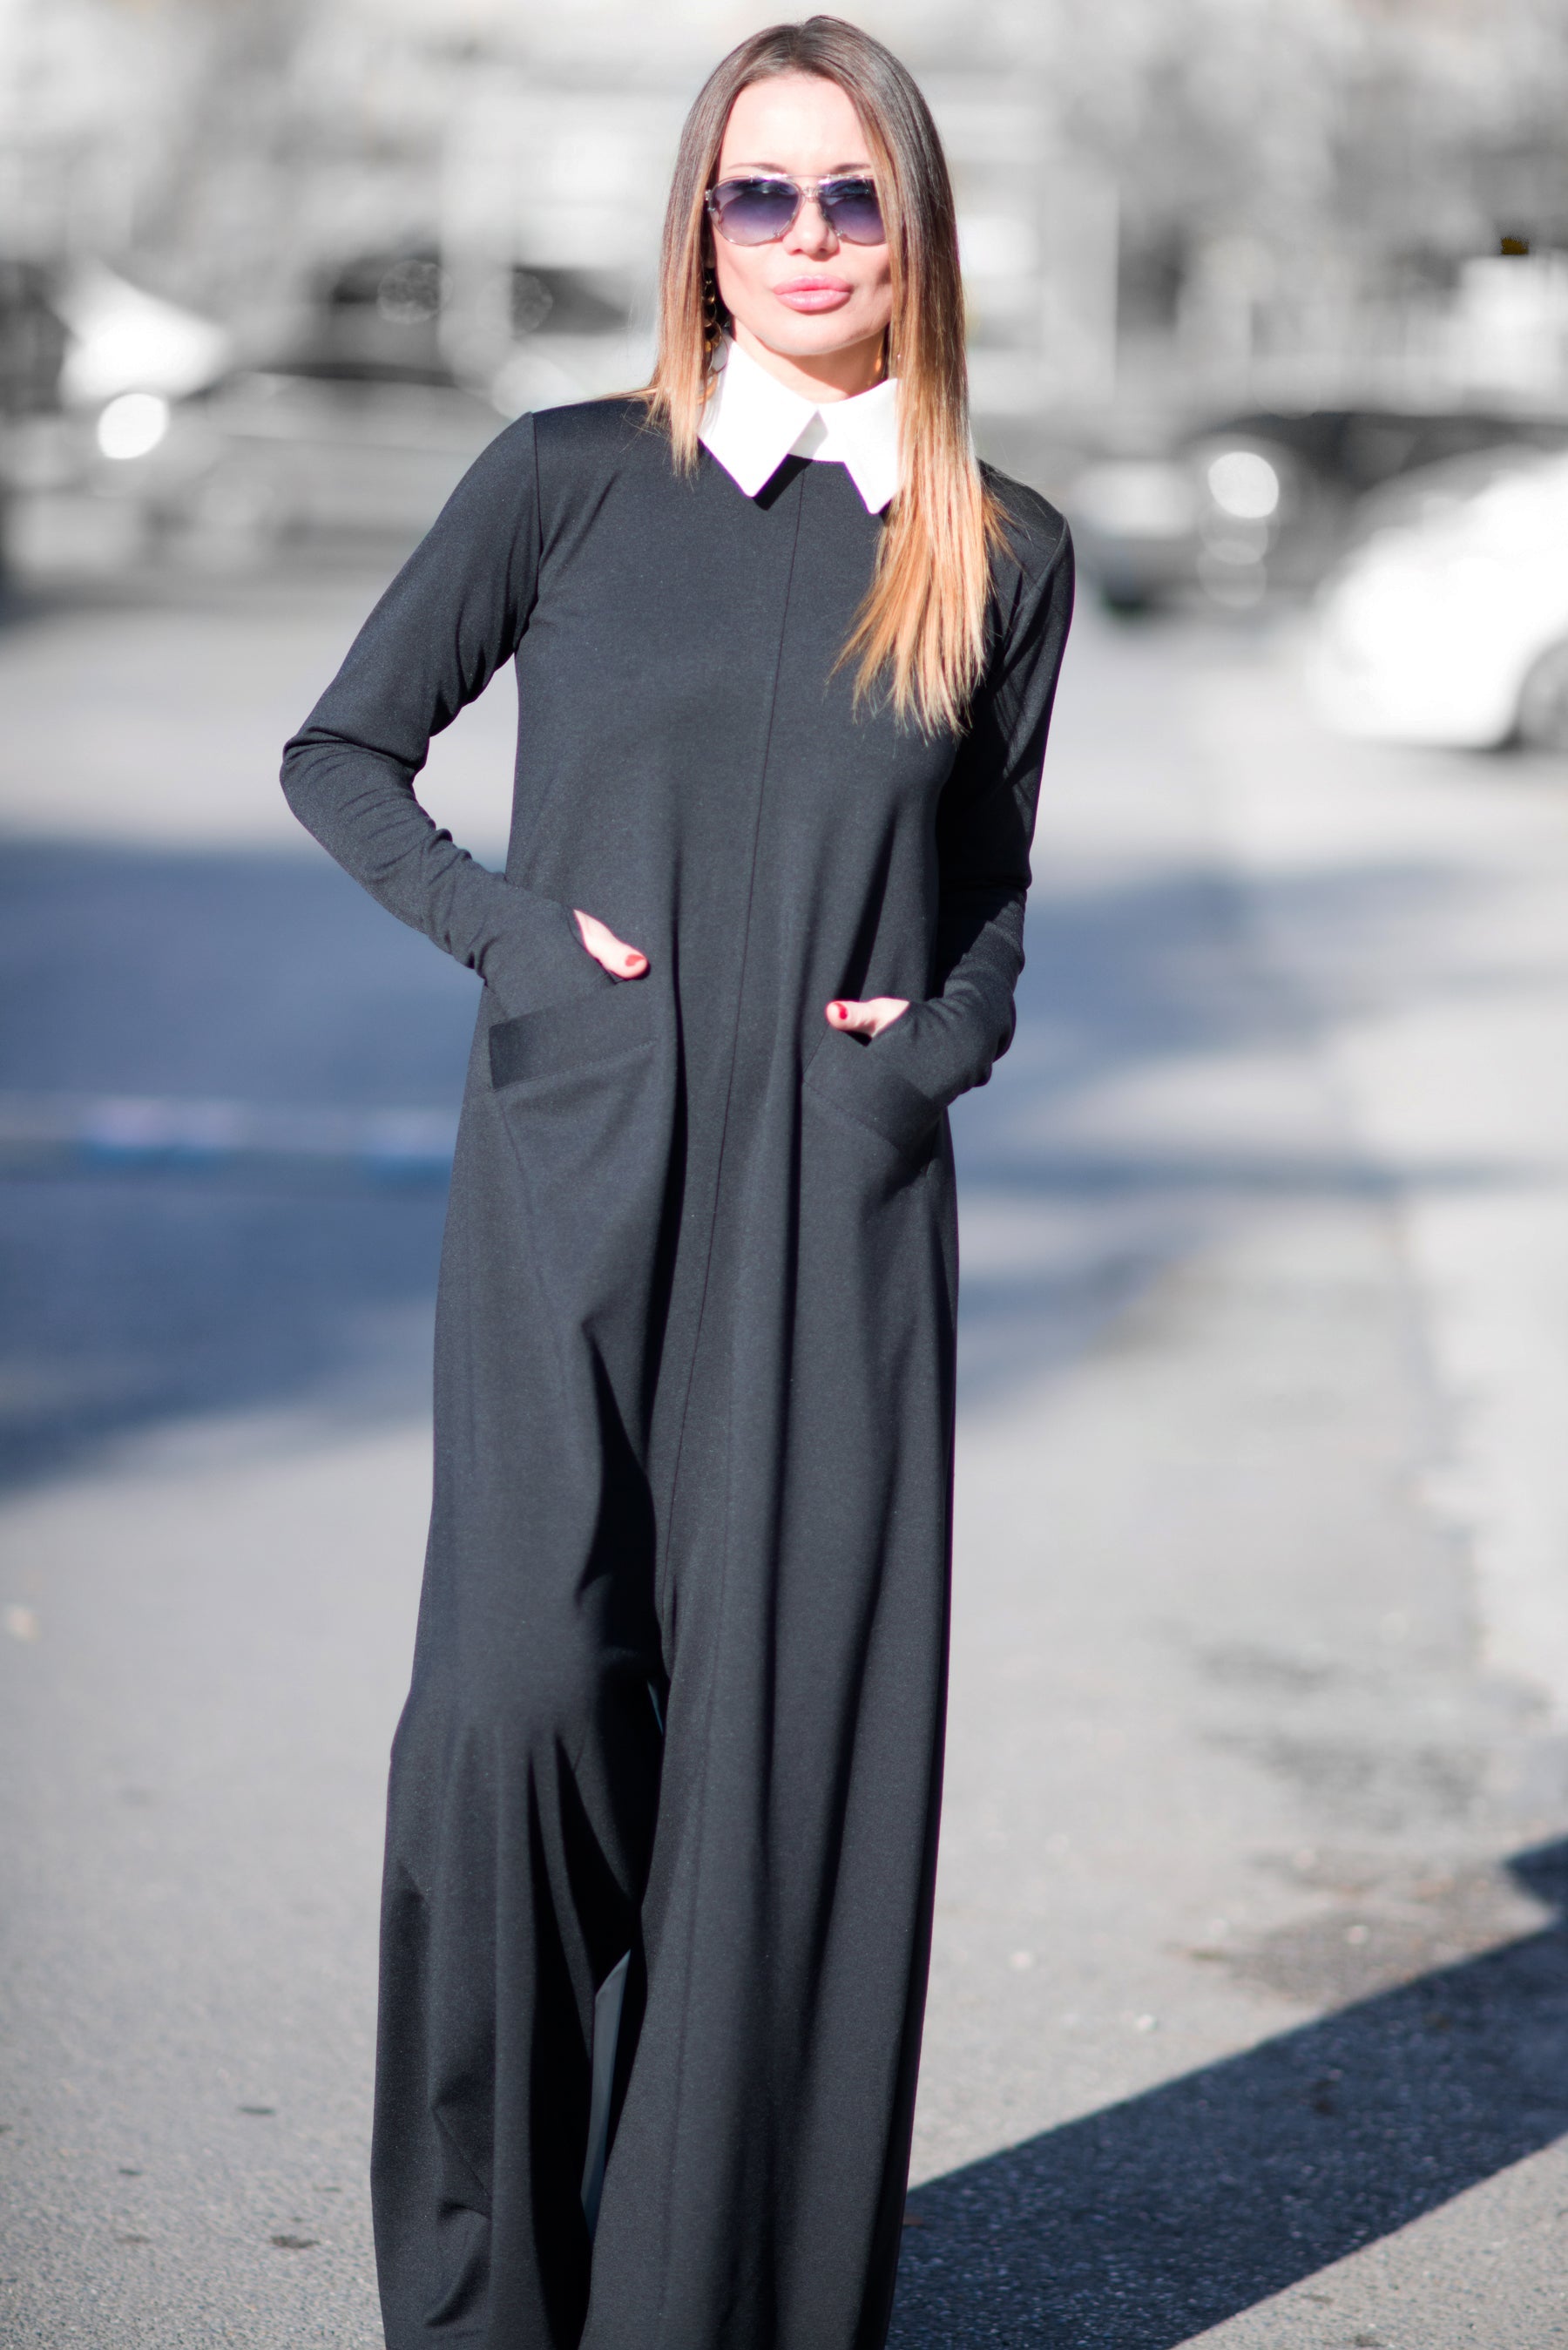 Black and white Turtleneck Winter Jumpsuit by EUG Fashion